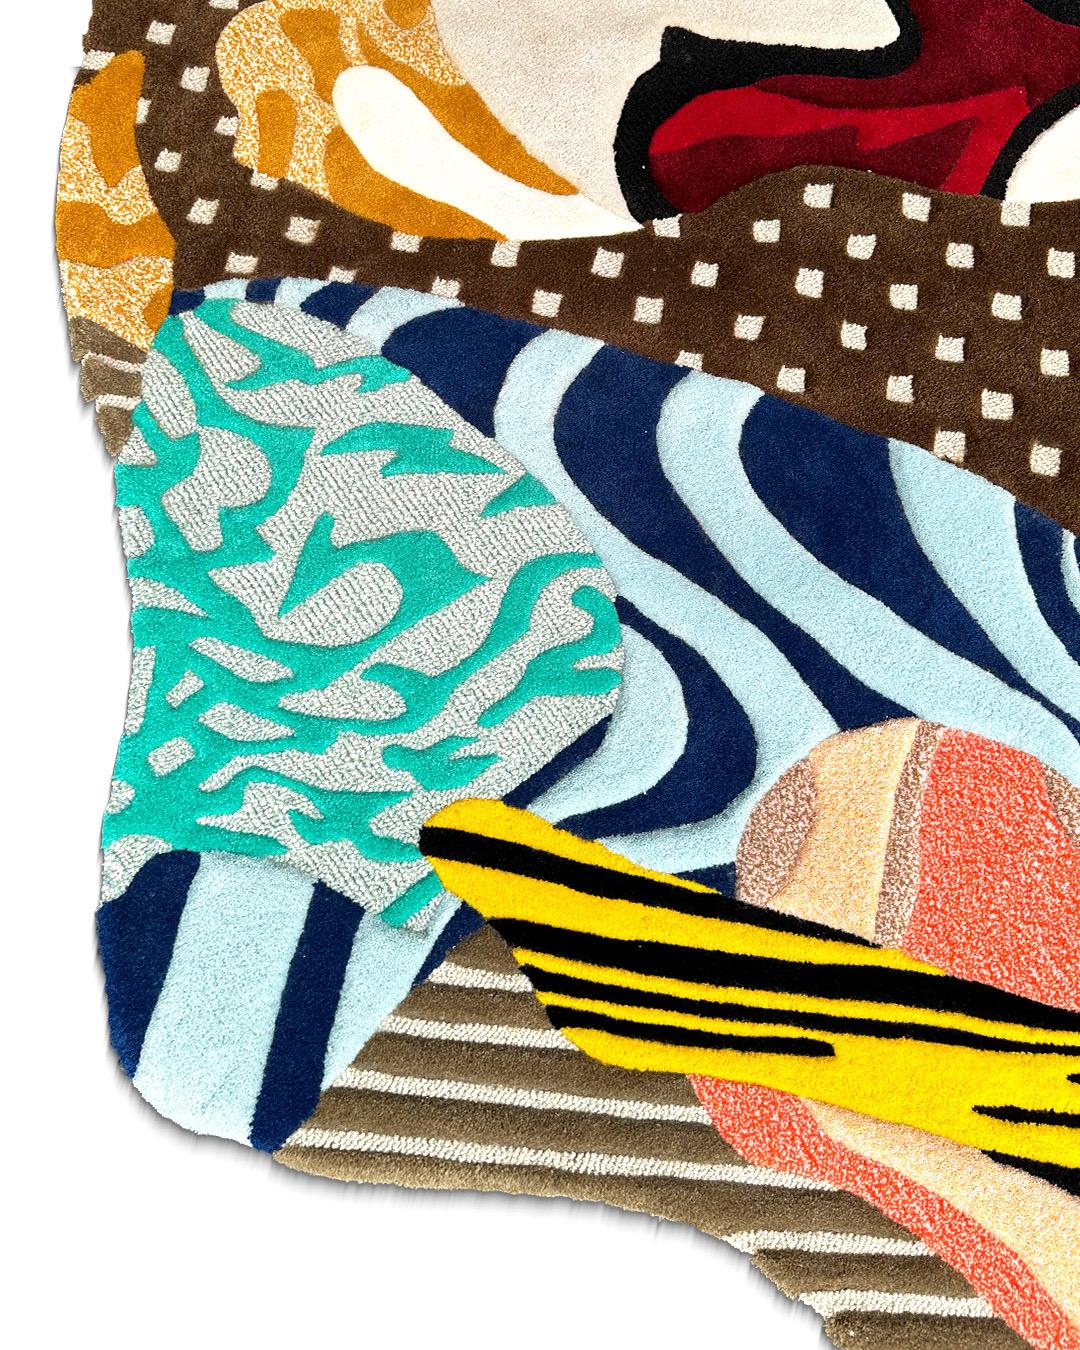 A personalized, spunky, and eclectic rug, resembling a collage of every decorative item in the room, exhibits an abstract pattern infused with geometric elements.
The organic, circular shape takes into consideration the preexisting chair placement,